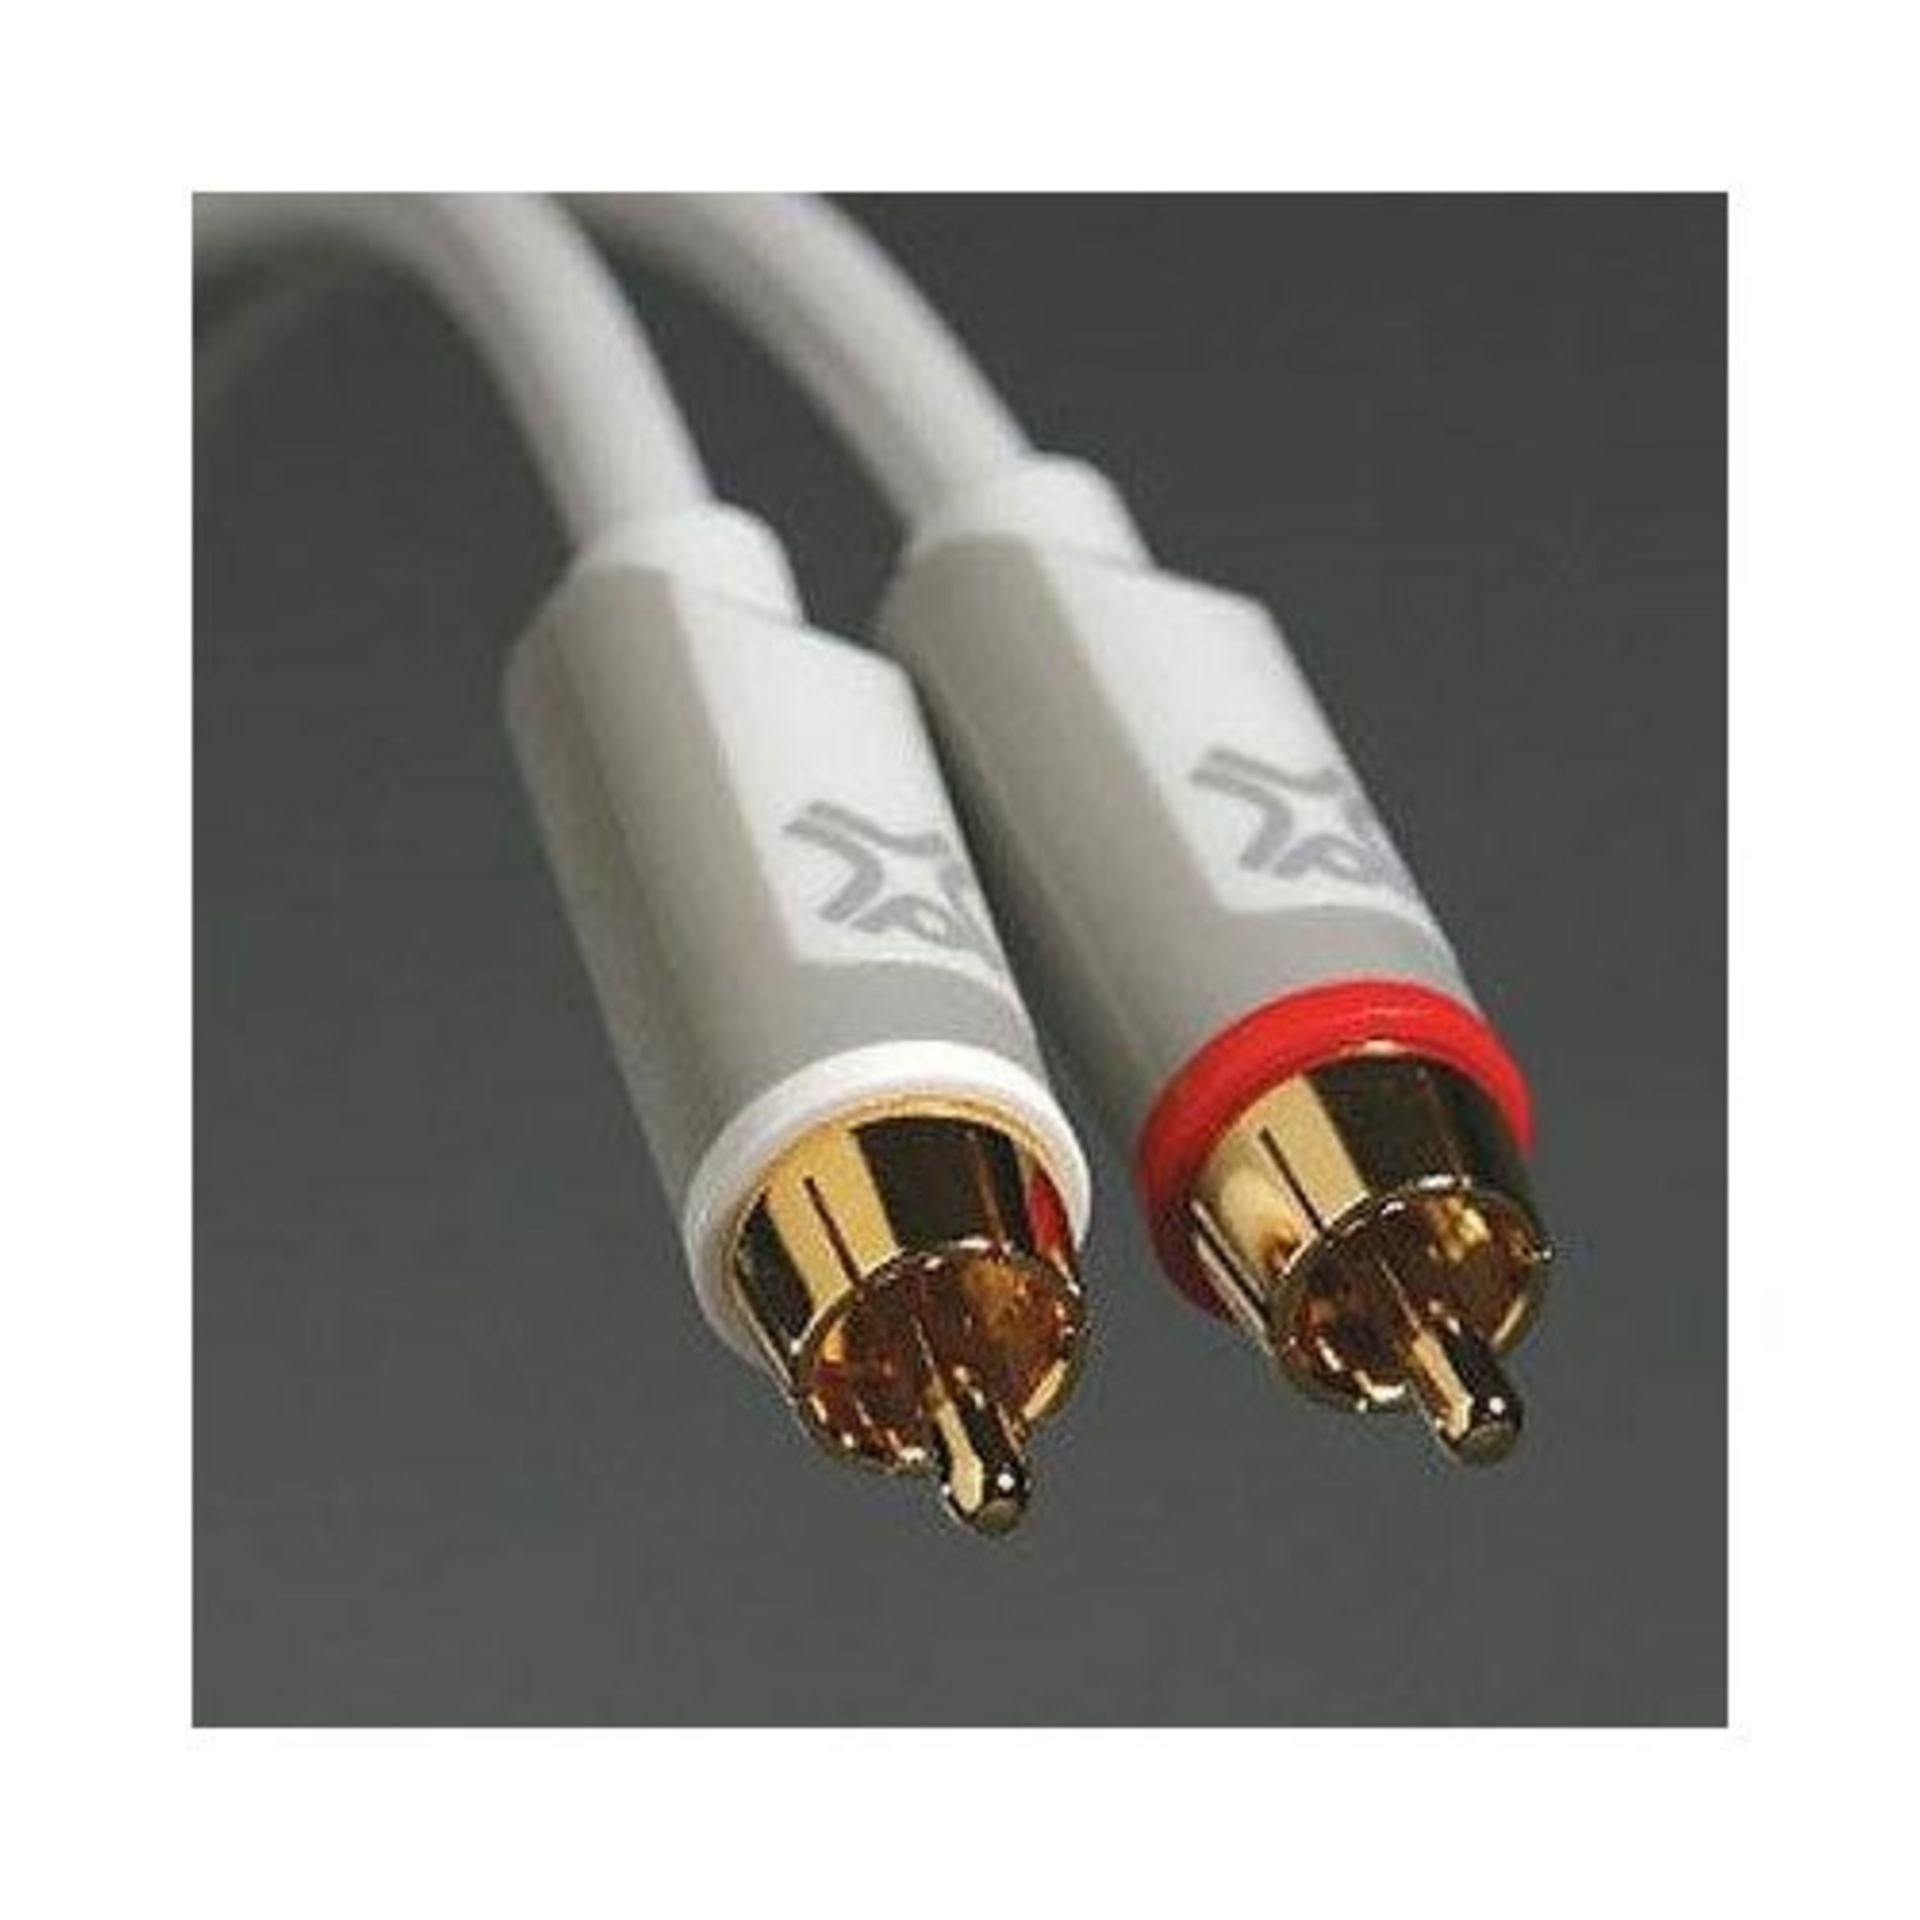 50 x XtremeHD 2M Analog Audio Twin RCA Gold Plated Cable EU